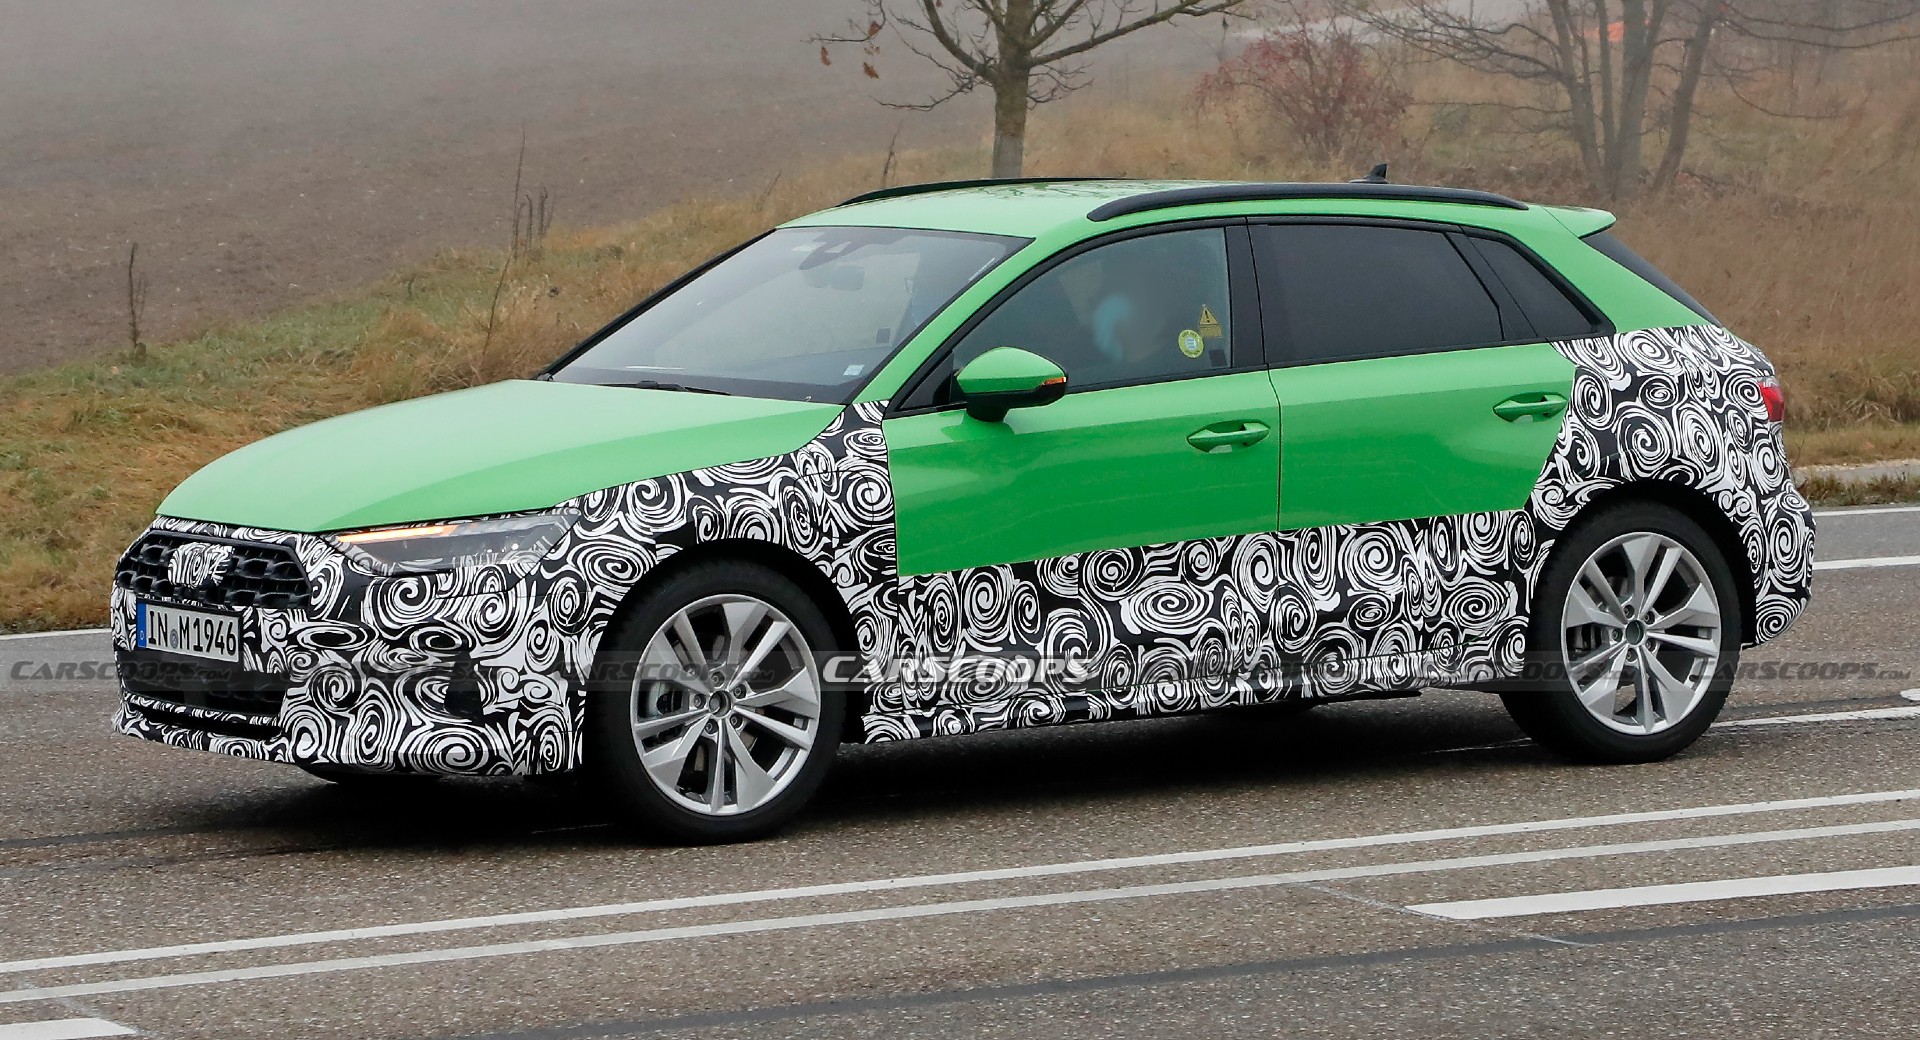 Should Audi Have Offered the A1 Hatch Stateside?